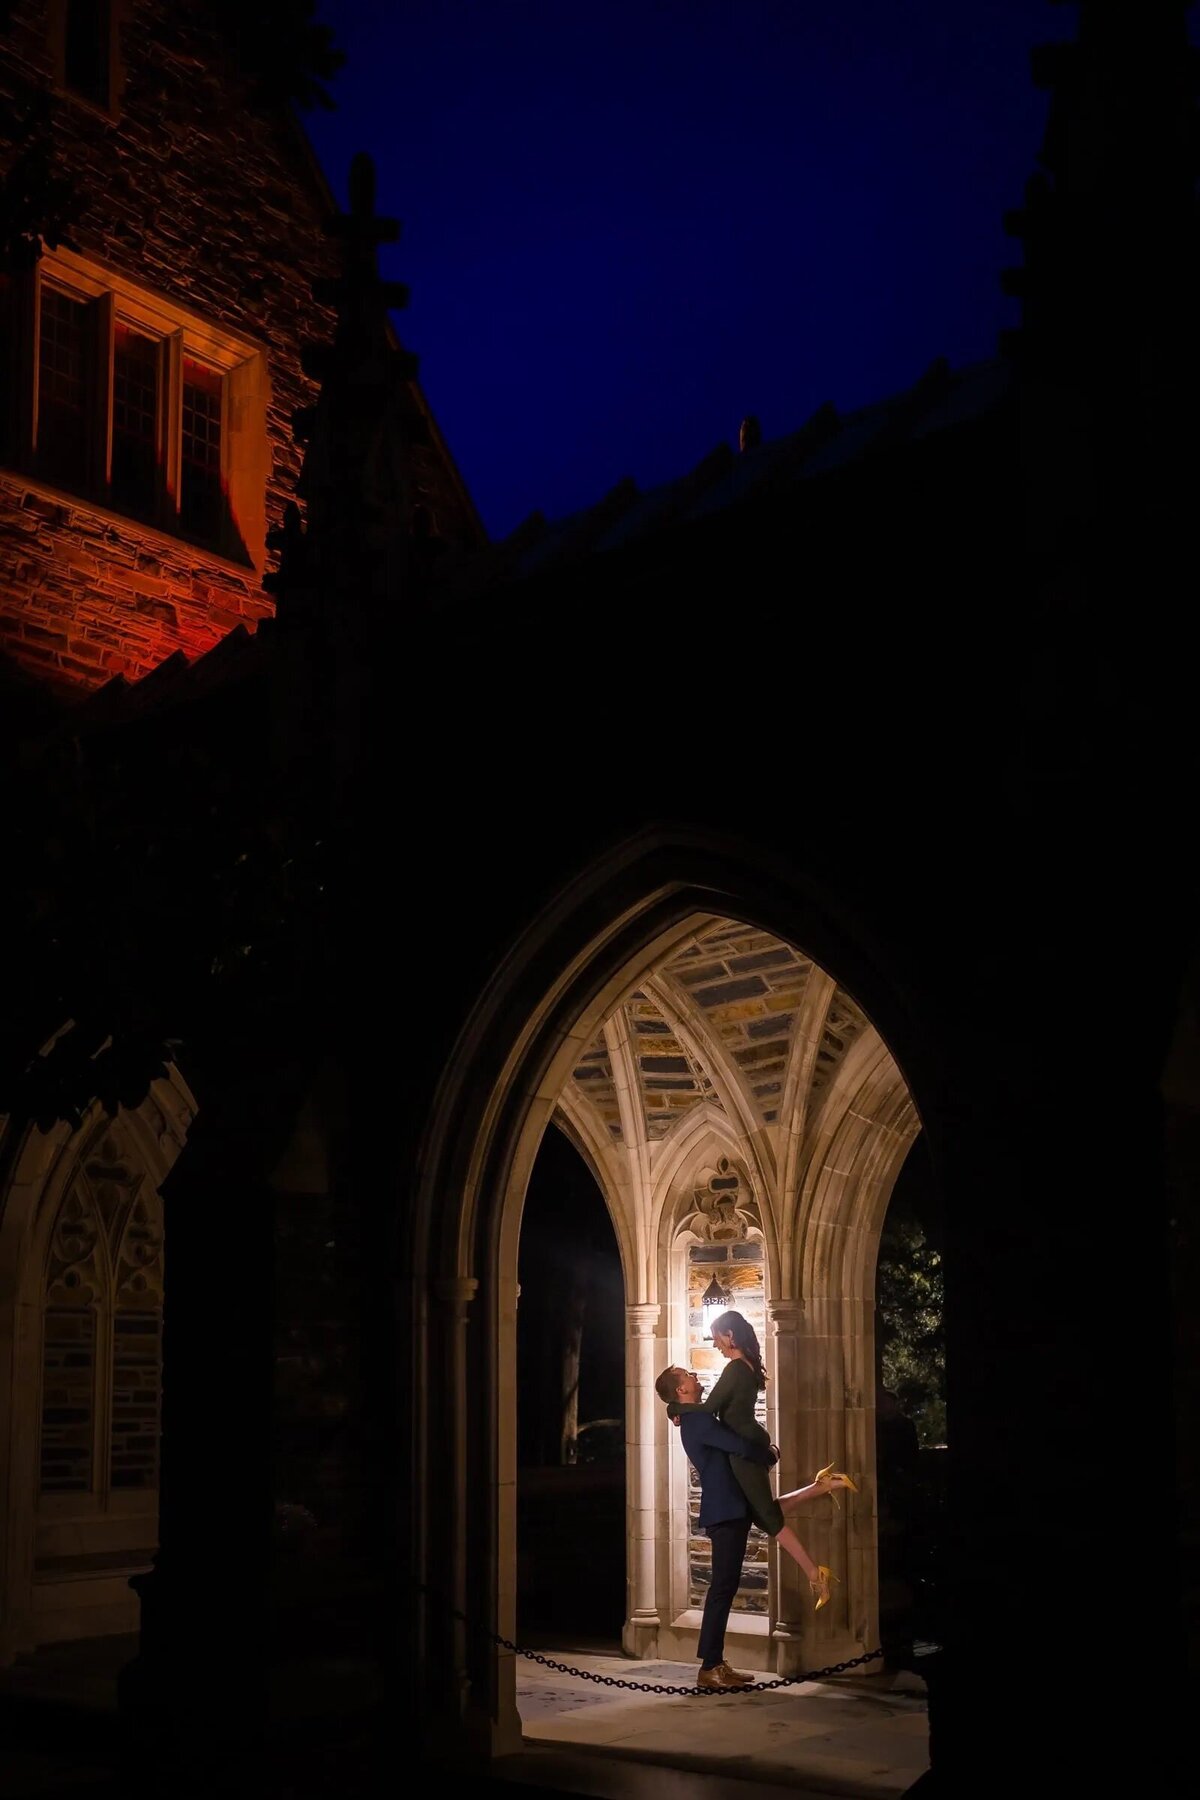 Couple in an arched doorway, with a man lifting a woman off the ground, backlit by the night sky